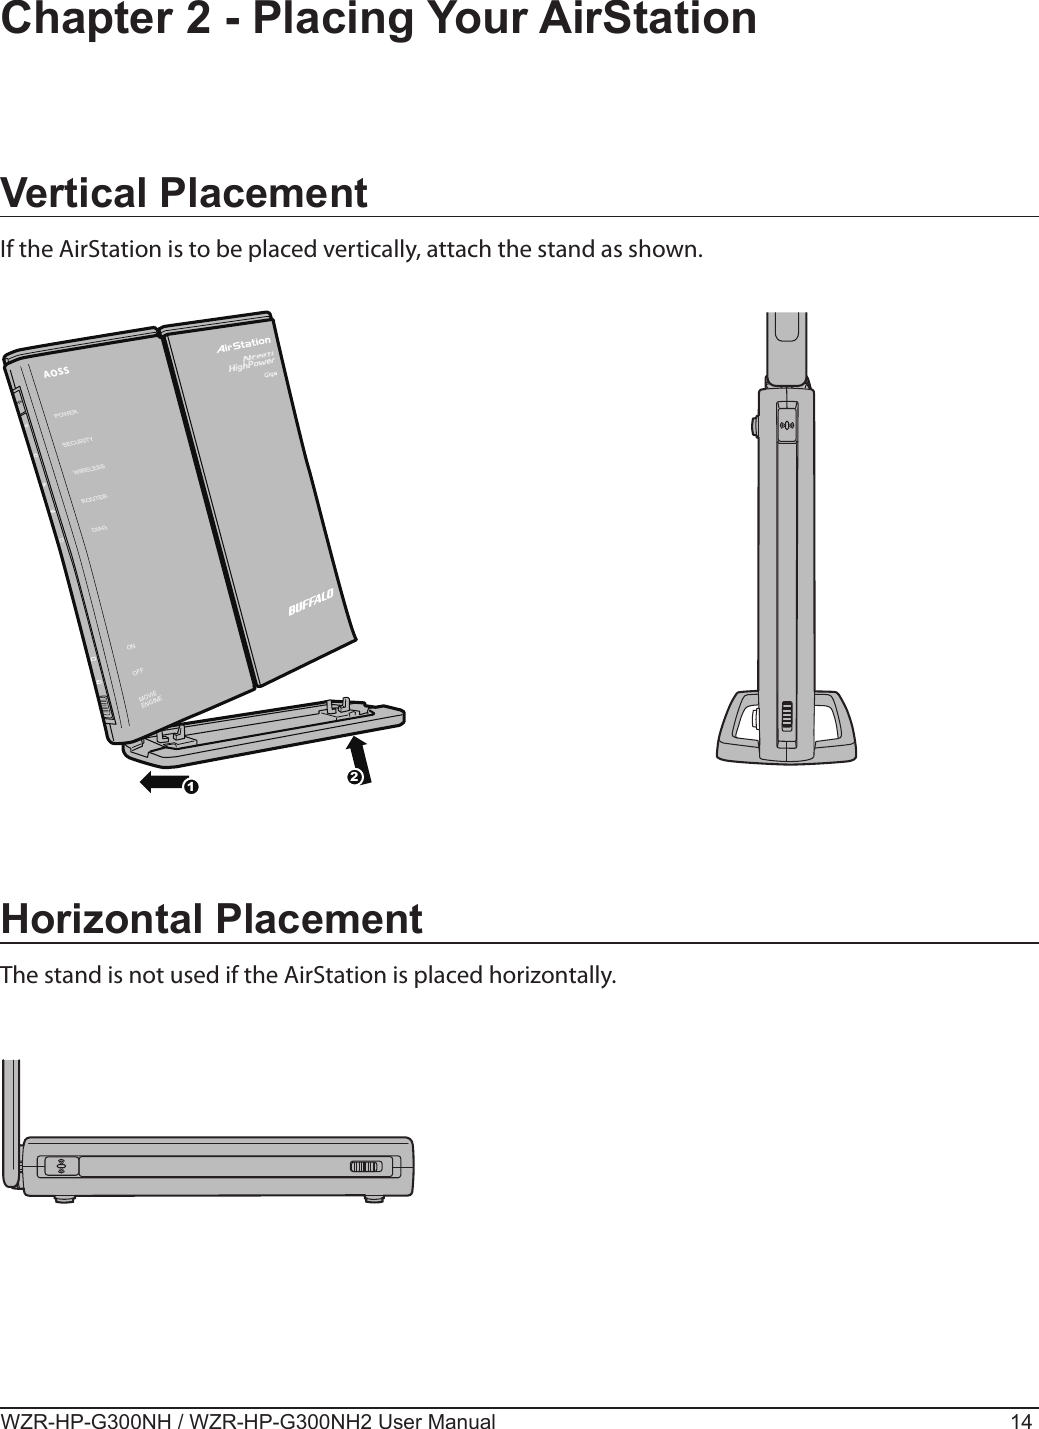 12AOSSONOFFMOVIEENGINEWZR-HP-G300NH / WZR-HP-G300NH2 User Manual 14Chapter 2 - Placing Your AirStationVertical PlacementIf the AirStation is to be placed vertically, attach the stand as shown.Horizontal PlacementThe stand is not used if the AirStation is placed horizontally.